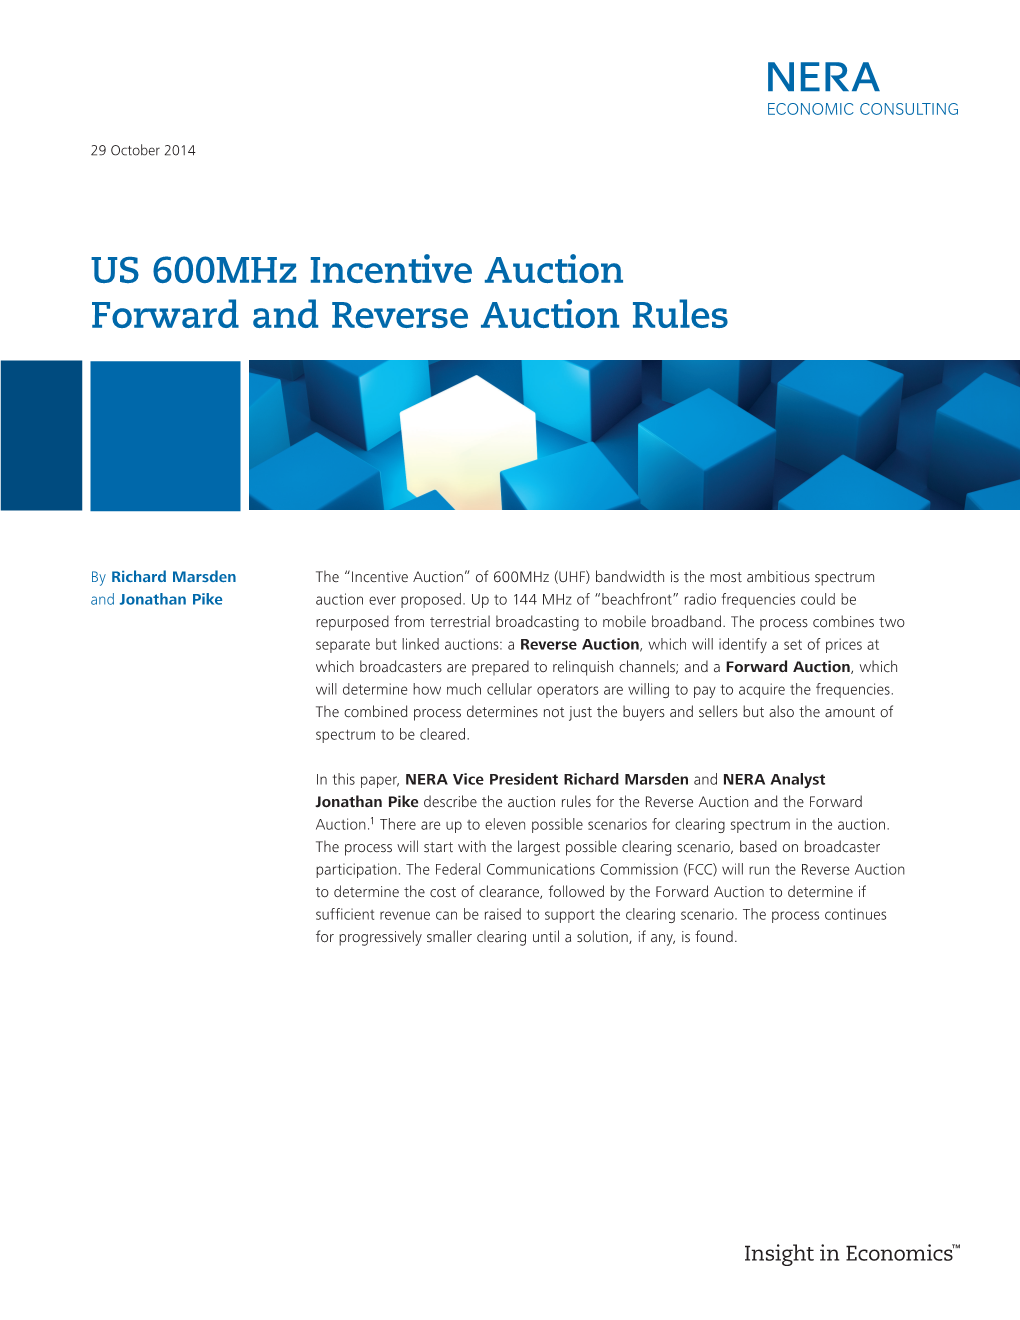 US 600Mhz Incentive Auction Forward and Reverse Auction Rules